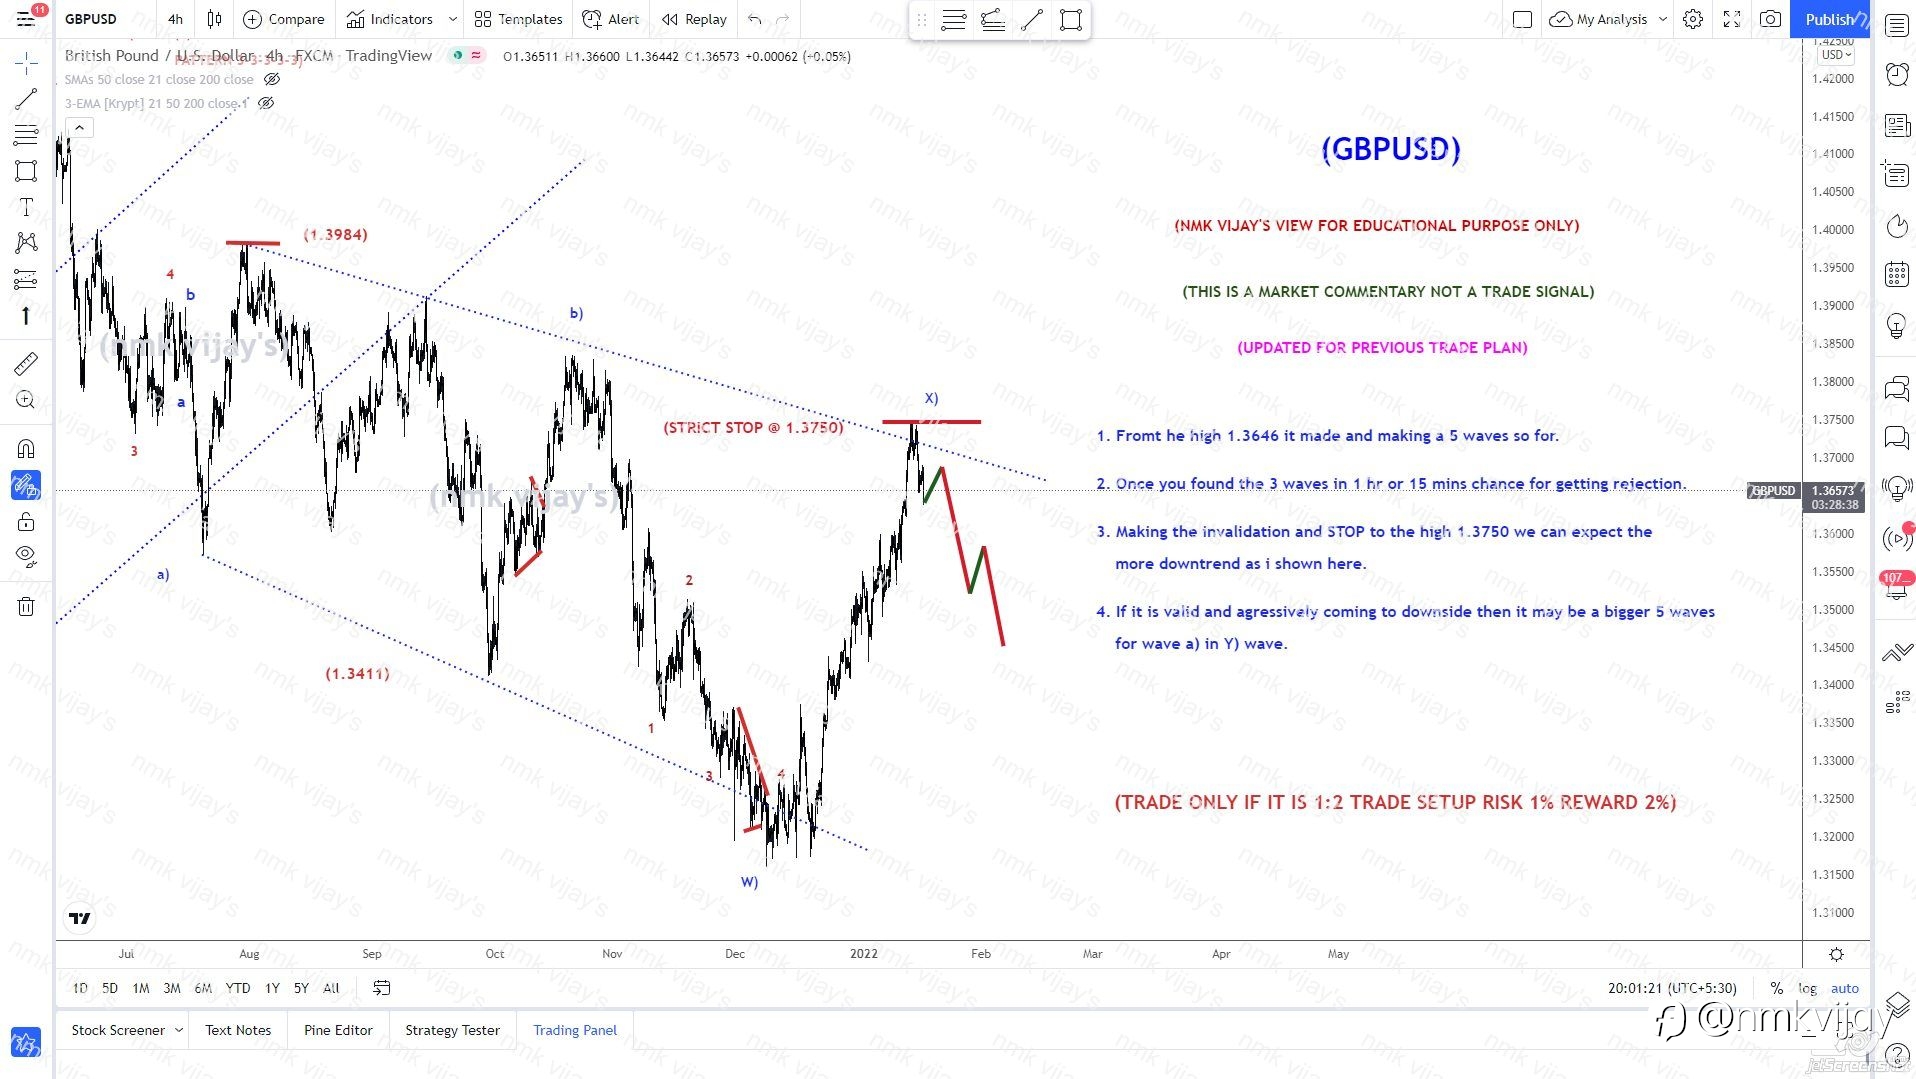 GBPUSD-Formed 5 waves to downside Looking more down !!!